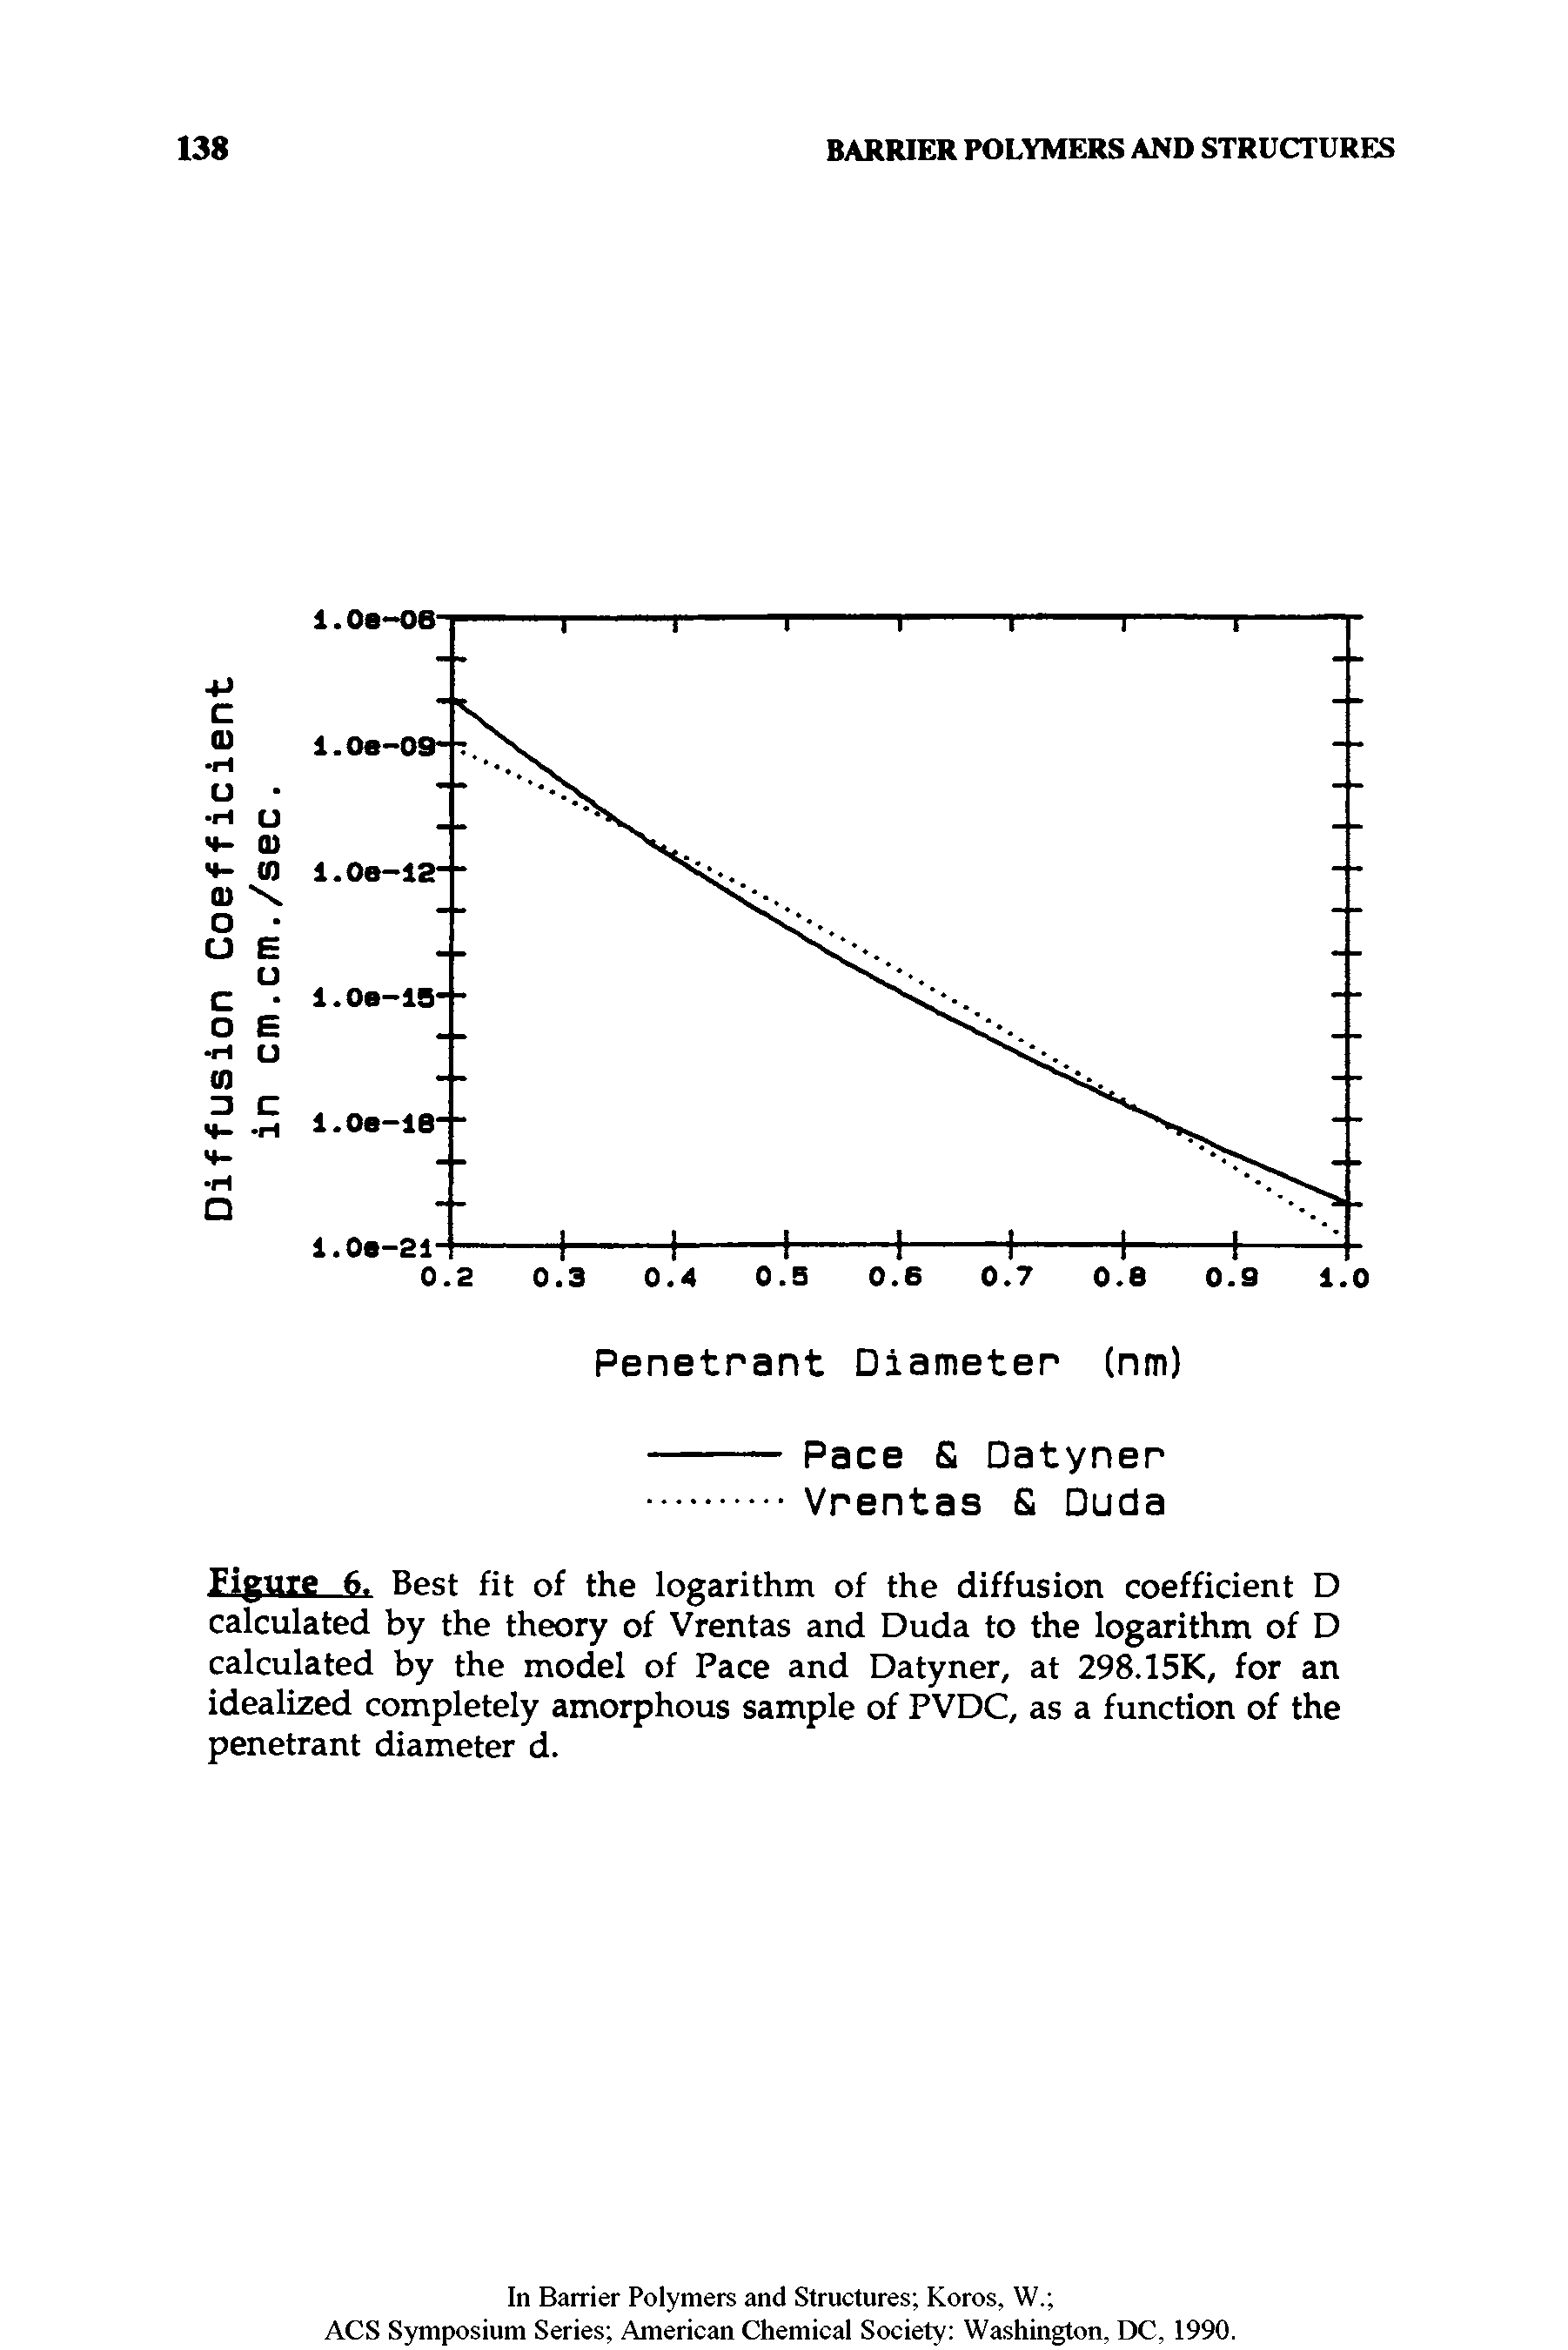 Figure 6. Best fit of the logarithm of the diffusion coefficient D calculated by the theory of Vrentas and Duda to the logarithm of D calculated by the model of Pace and Datyner, at 298.15K, for an idealized completely amorphous sample of PVDC, as a function of the penetrant diameter d.